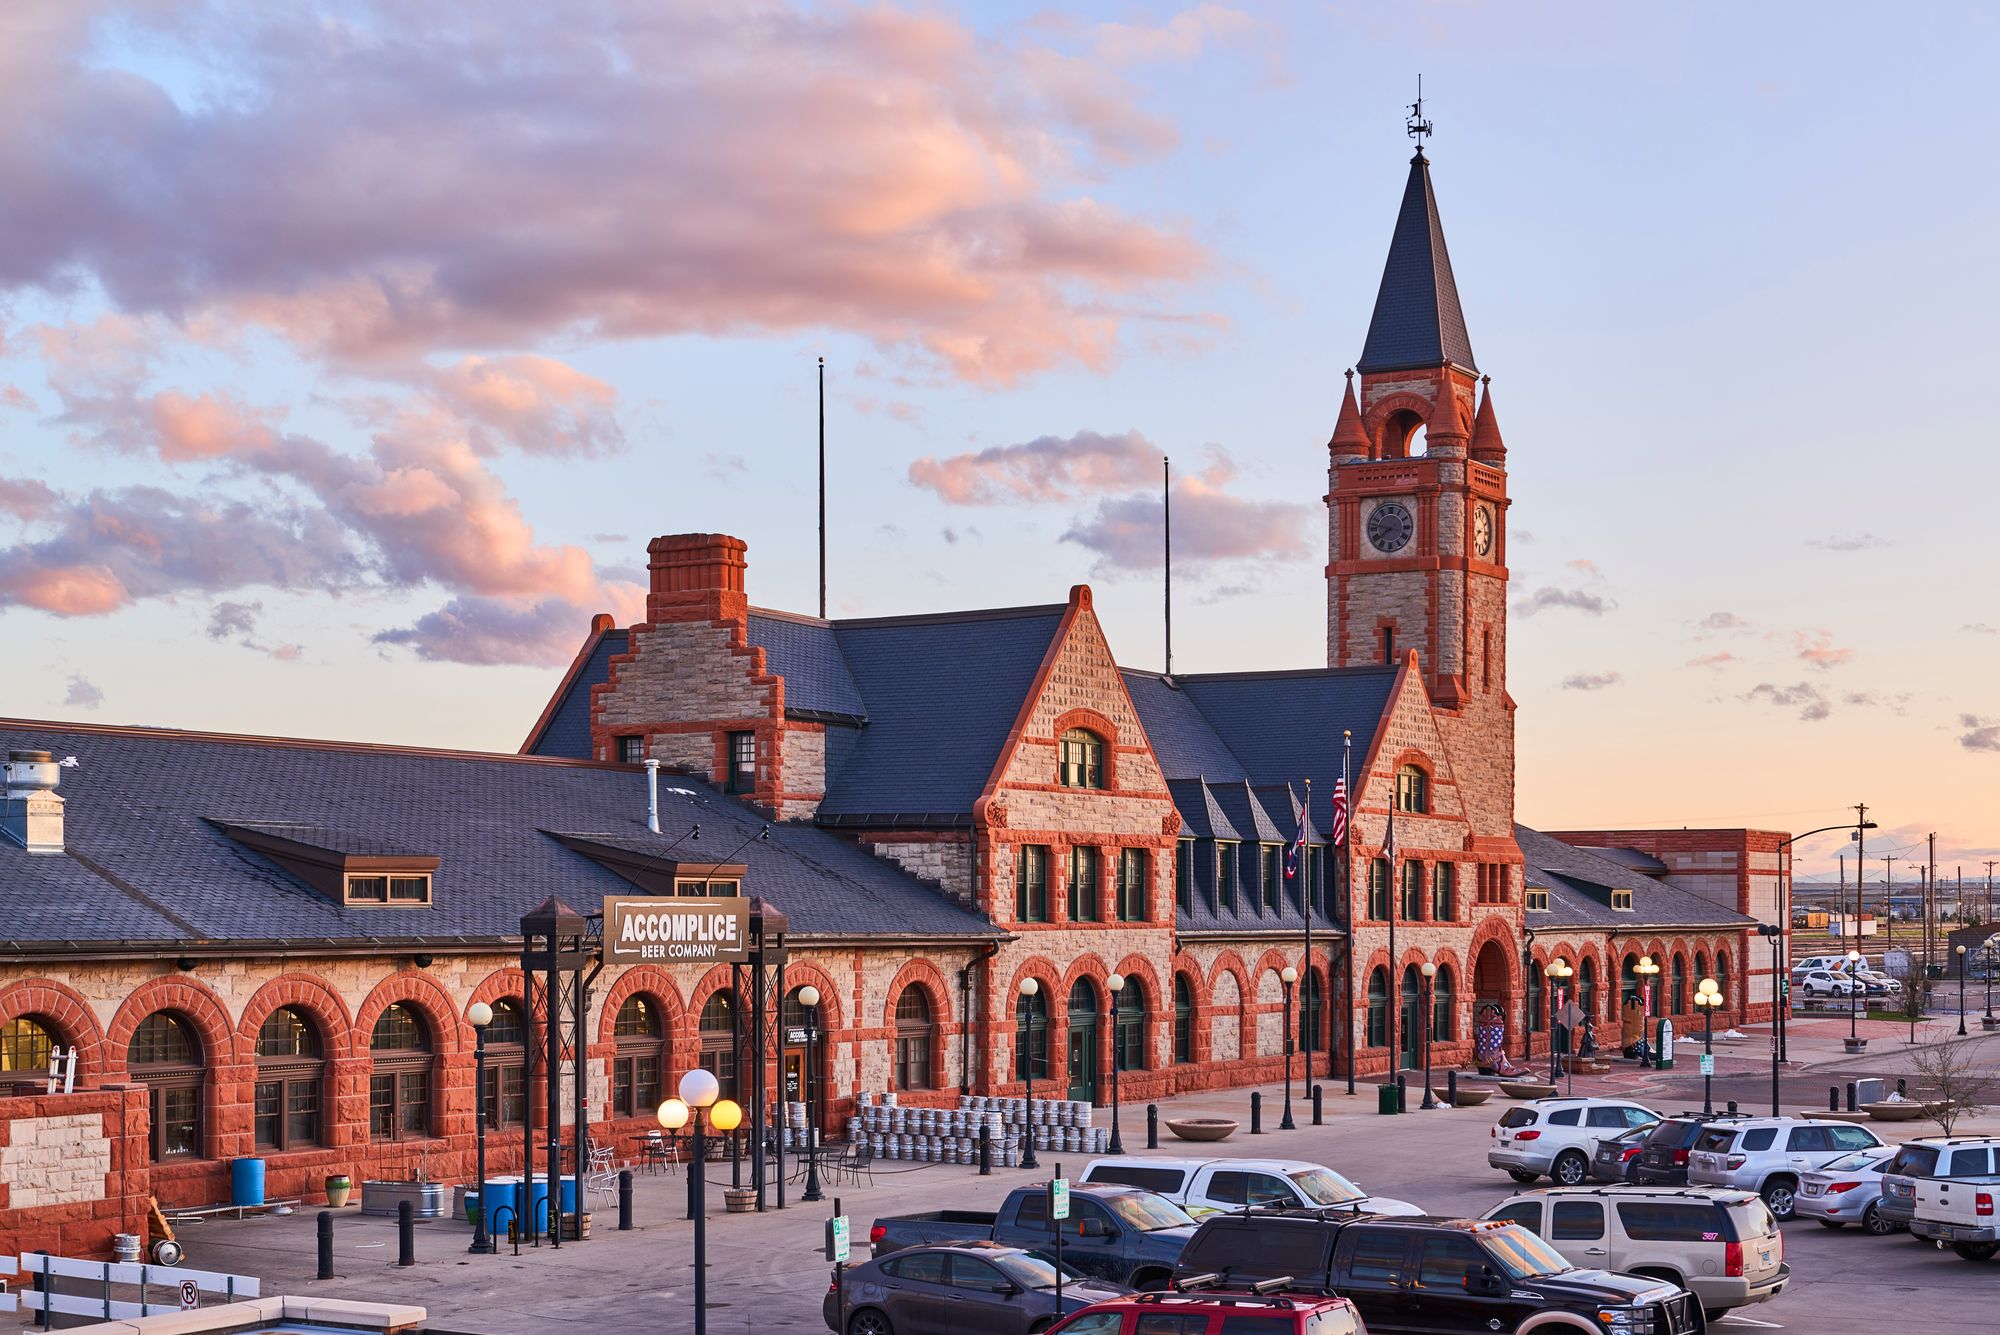 Don't Miss The Cheyenne Depot Museum May Rail Event 2021